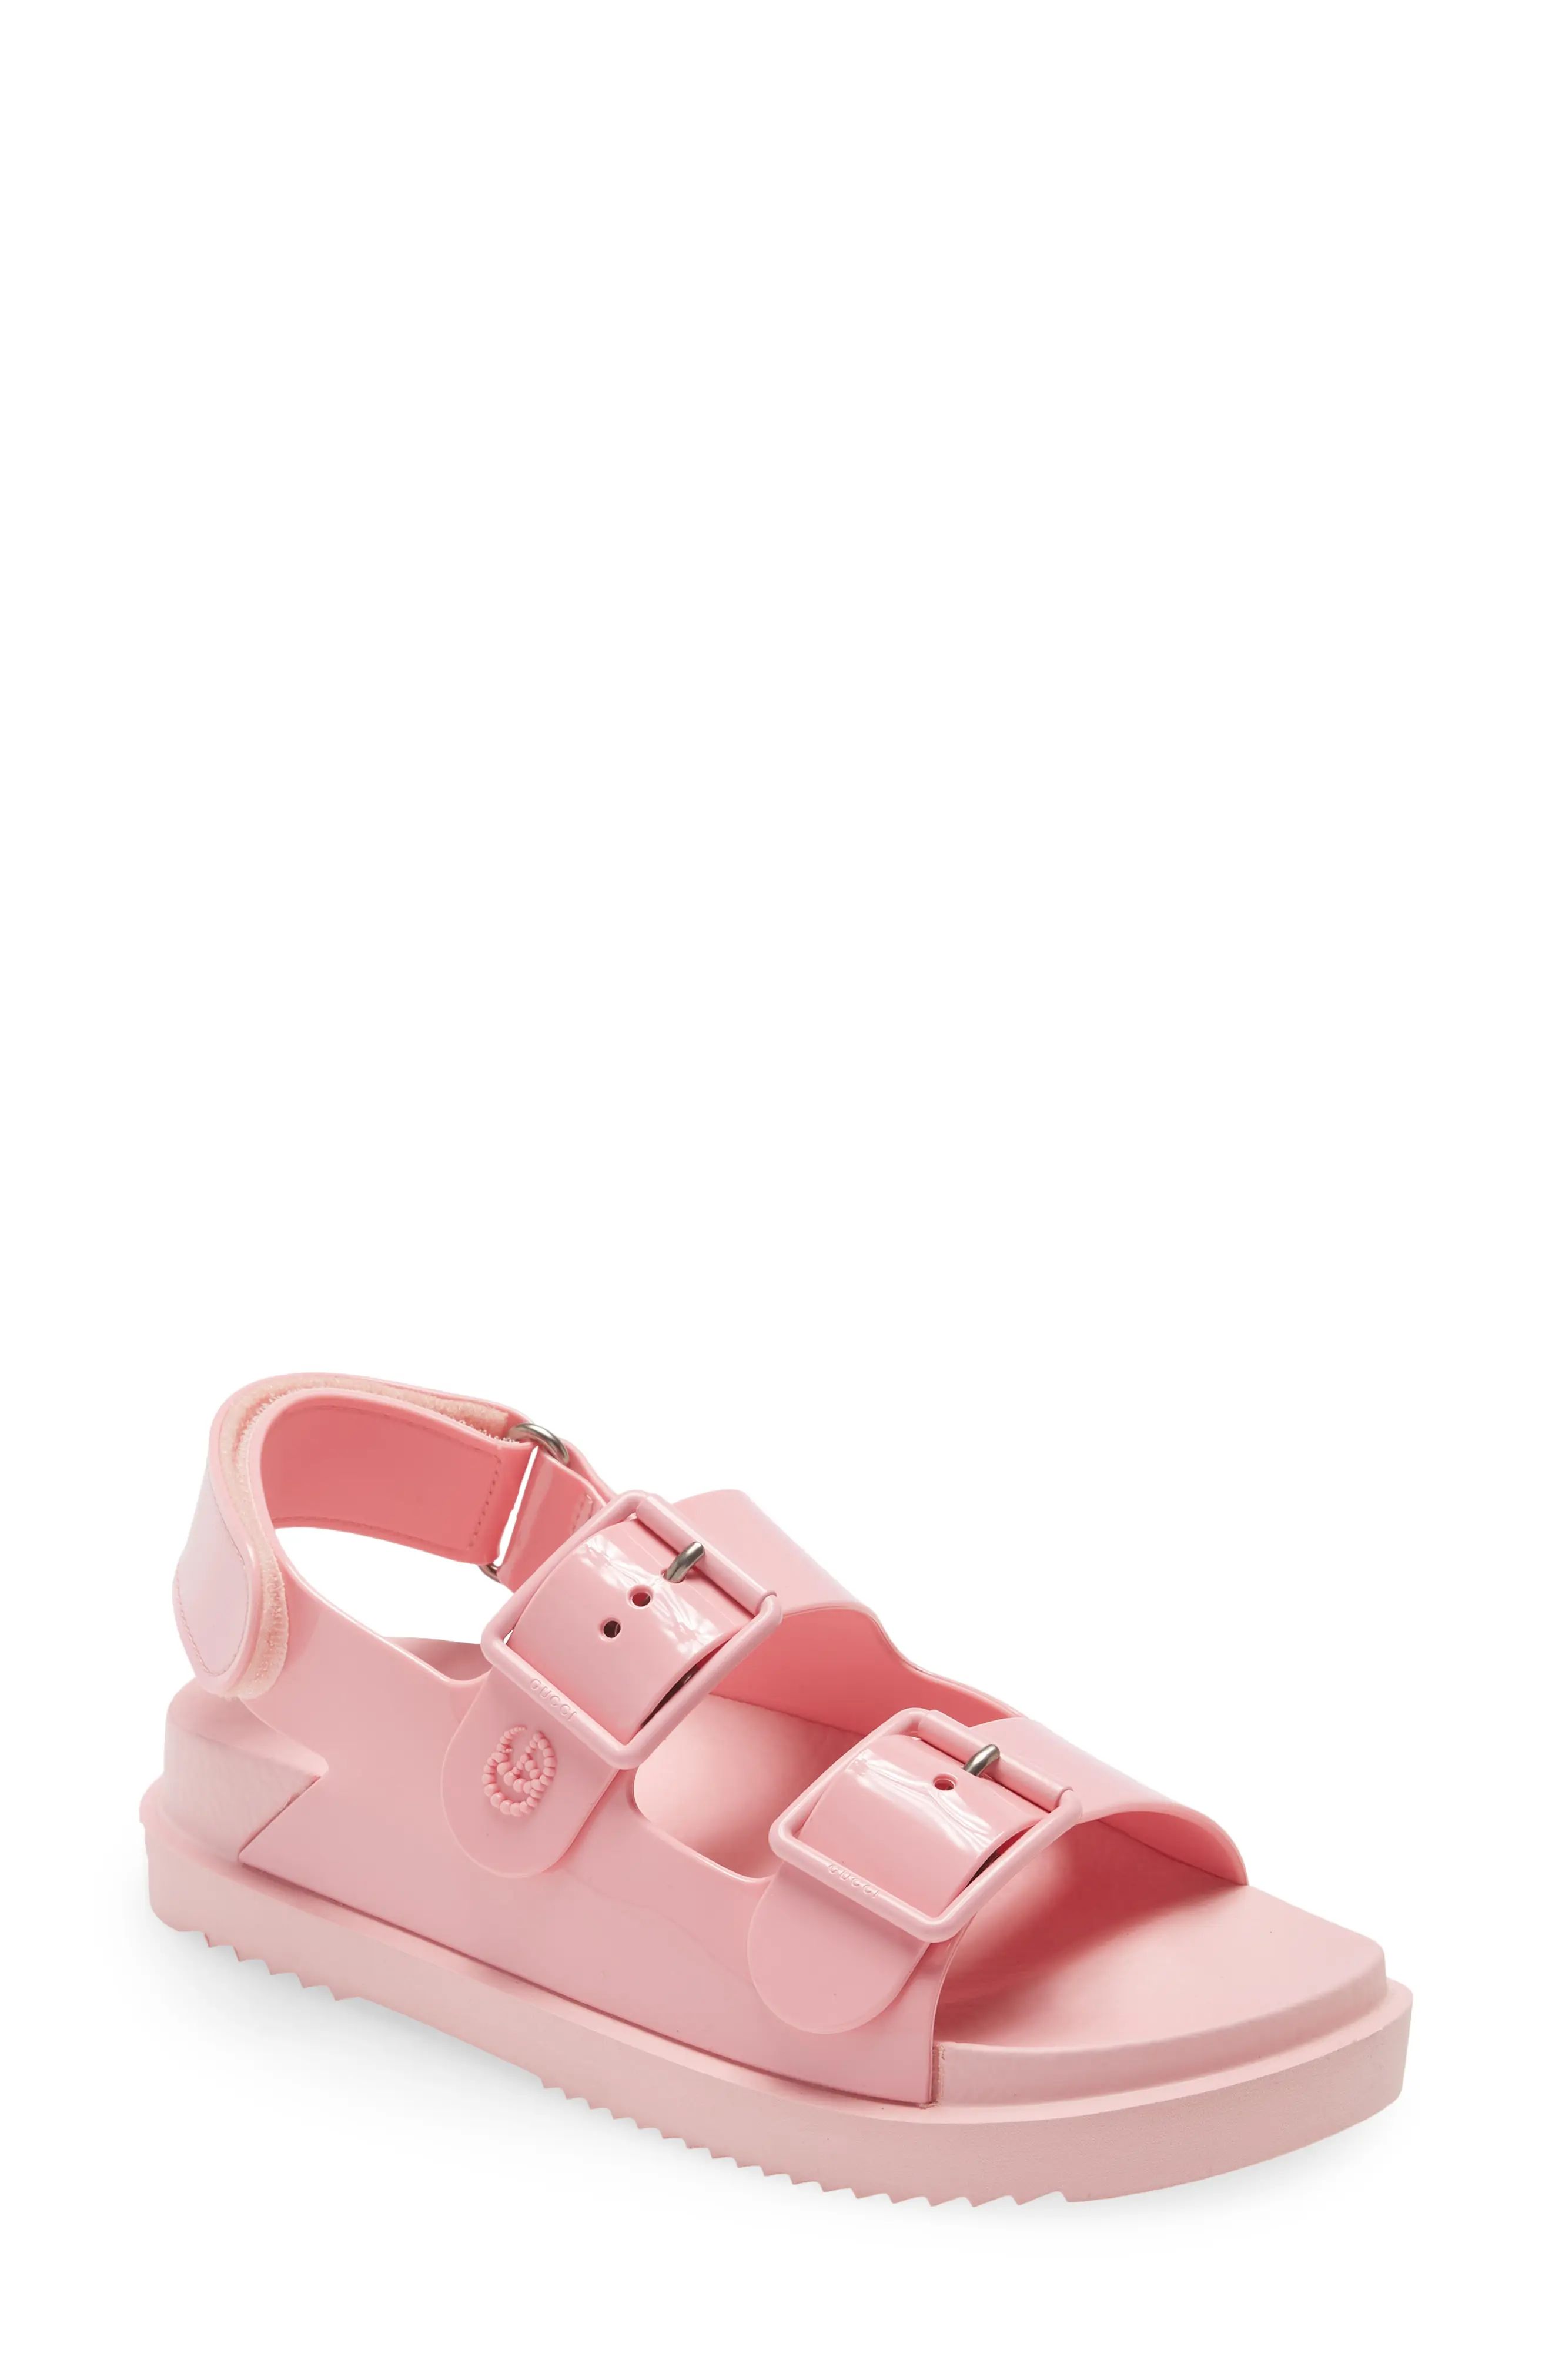 Gucci Isla Double Strap Sandal in Wild Rose at Nordstrom, Size 11Us | Nordstrom